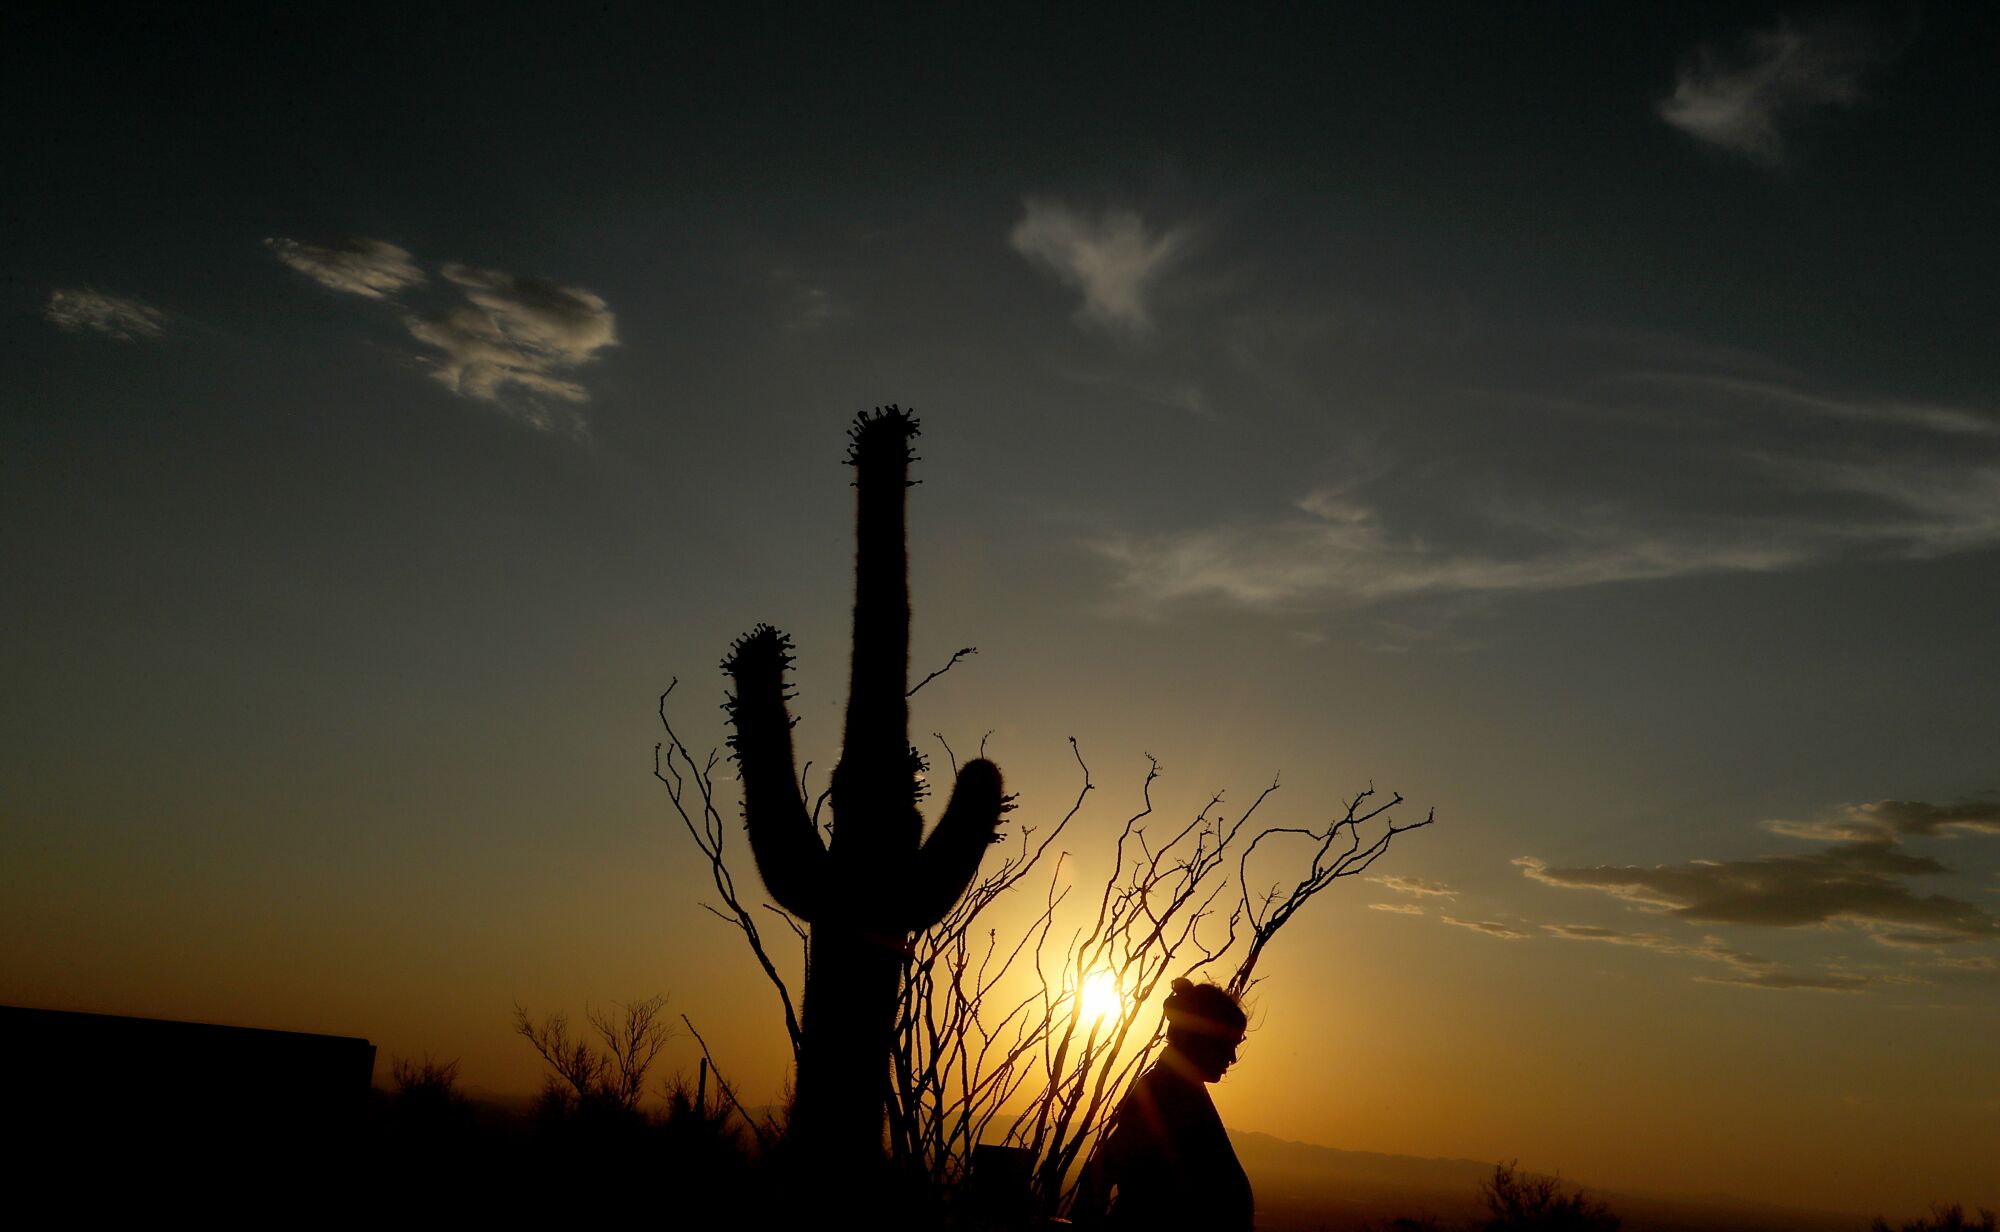 A visitor walks around Dobbins Lookout above Phoenix, now the fifth largest city in the U.S.